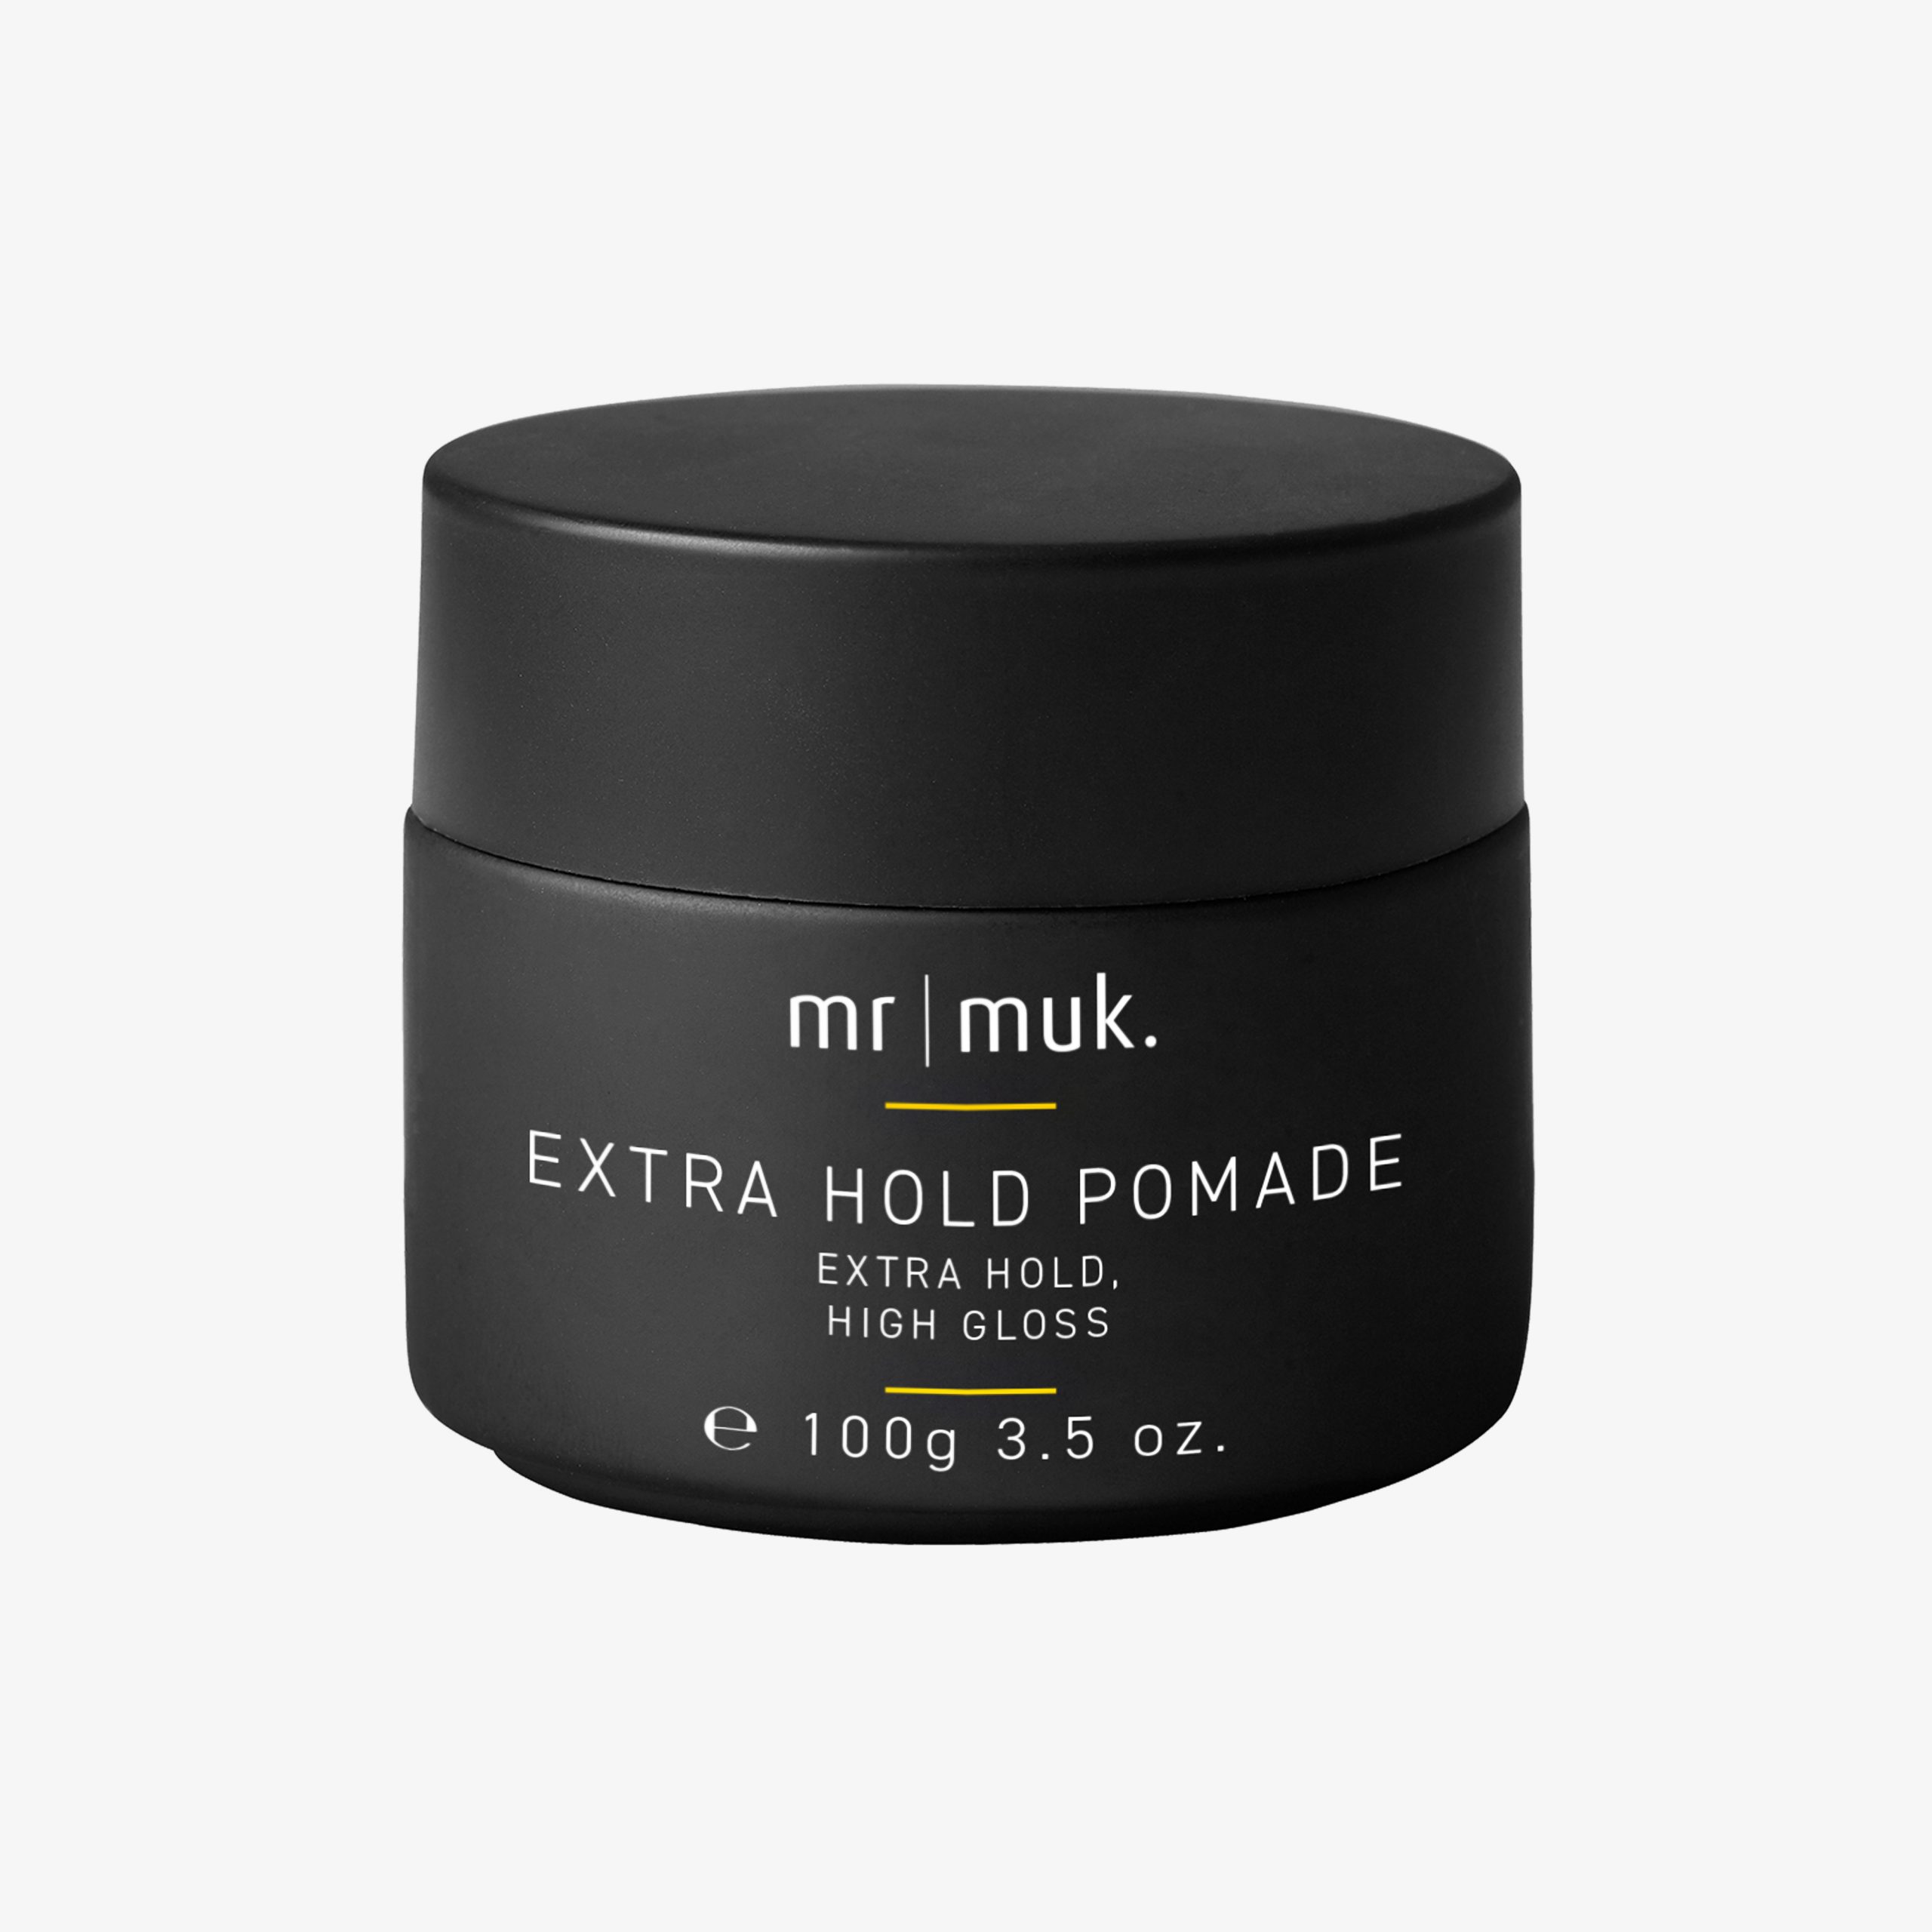 https://www.mukhair.com/wp-content/uploads/2019/05/ExtraHoldPomade-copy-scaled.jpg